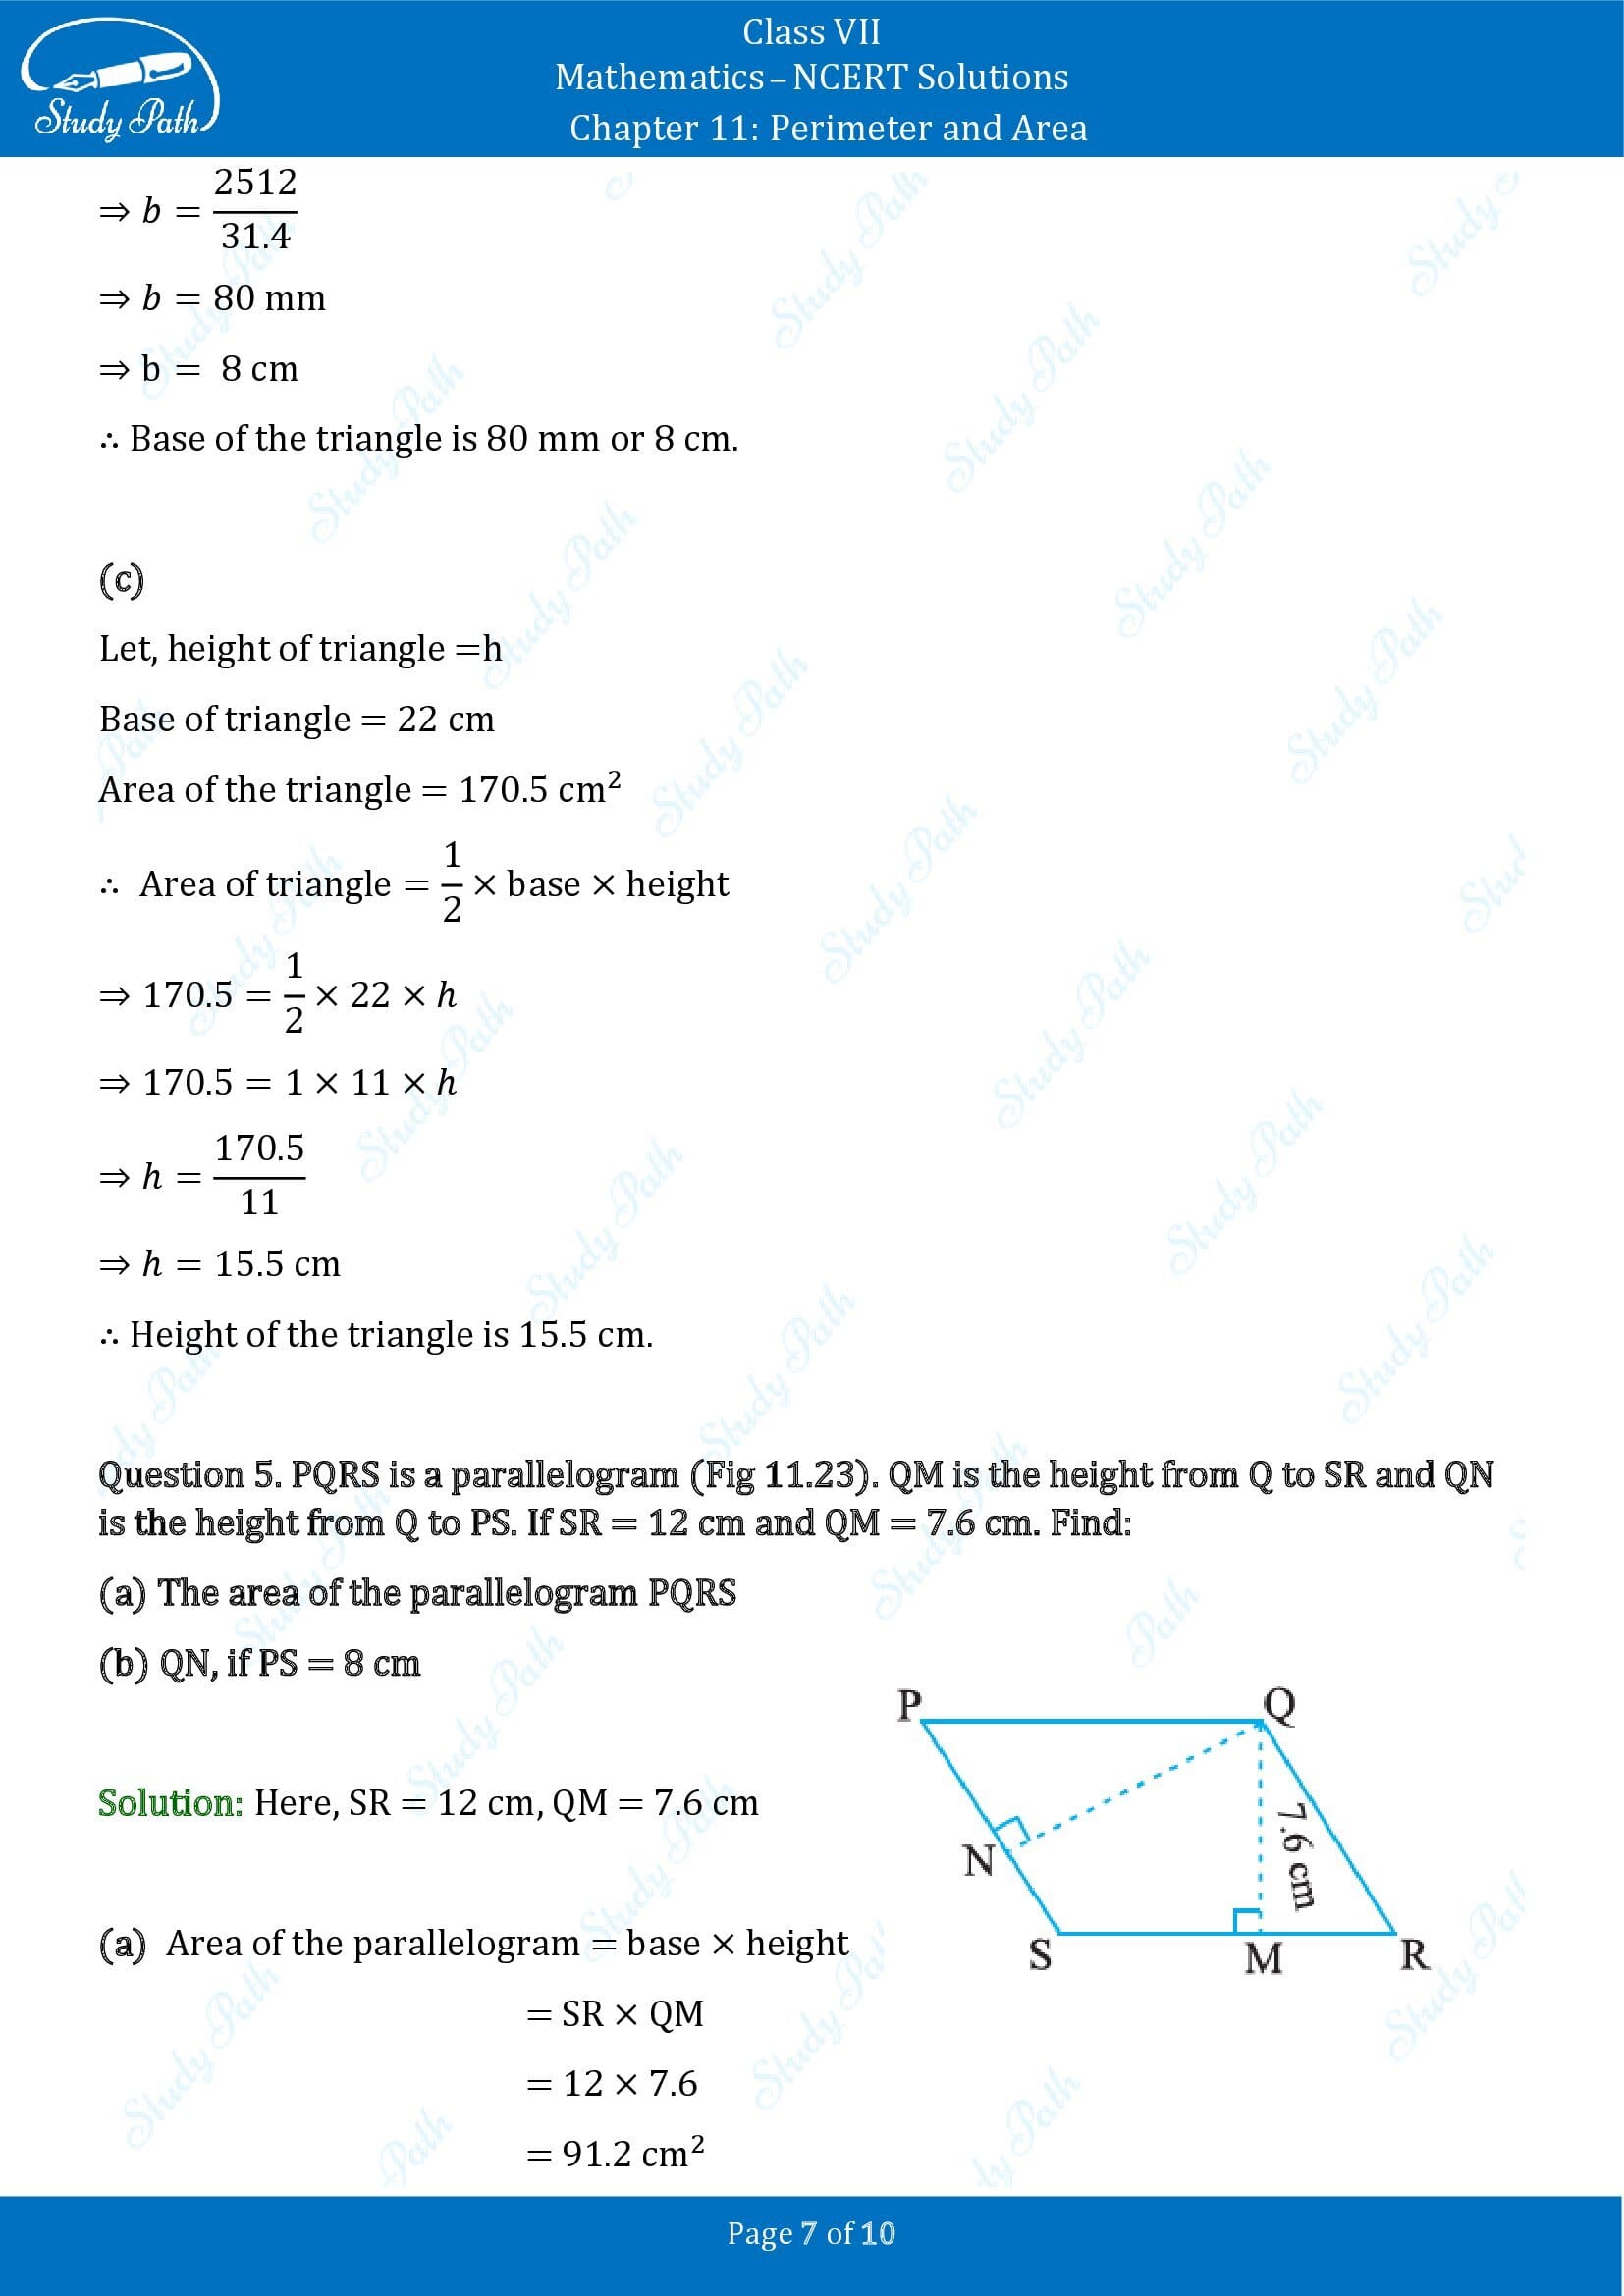 NCERT Solutions for Class 7 Maths Chapter 11 Perimeter and Area Exercise 11.2 00007